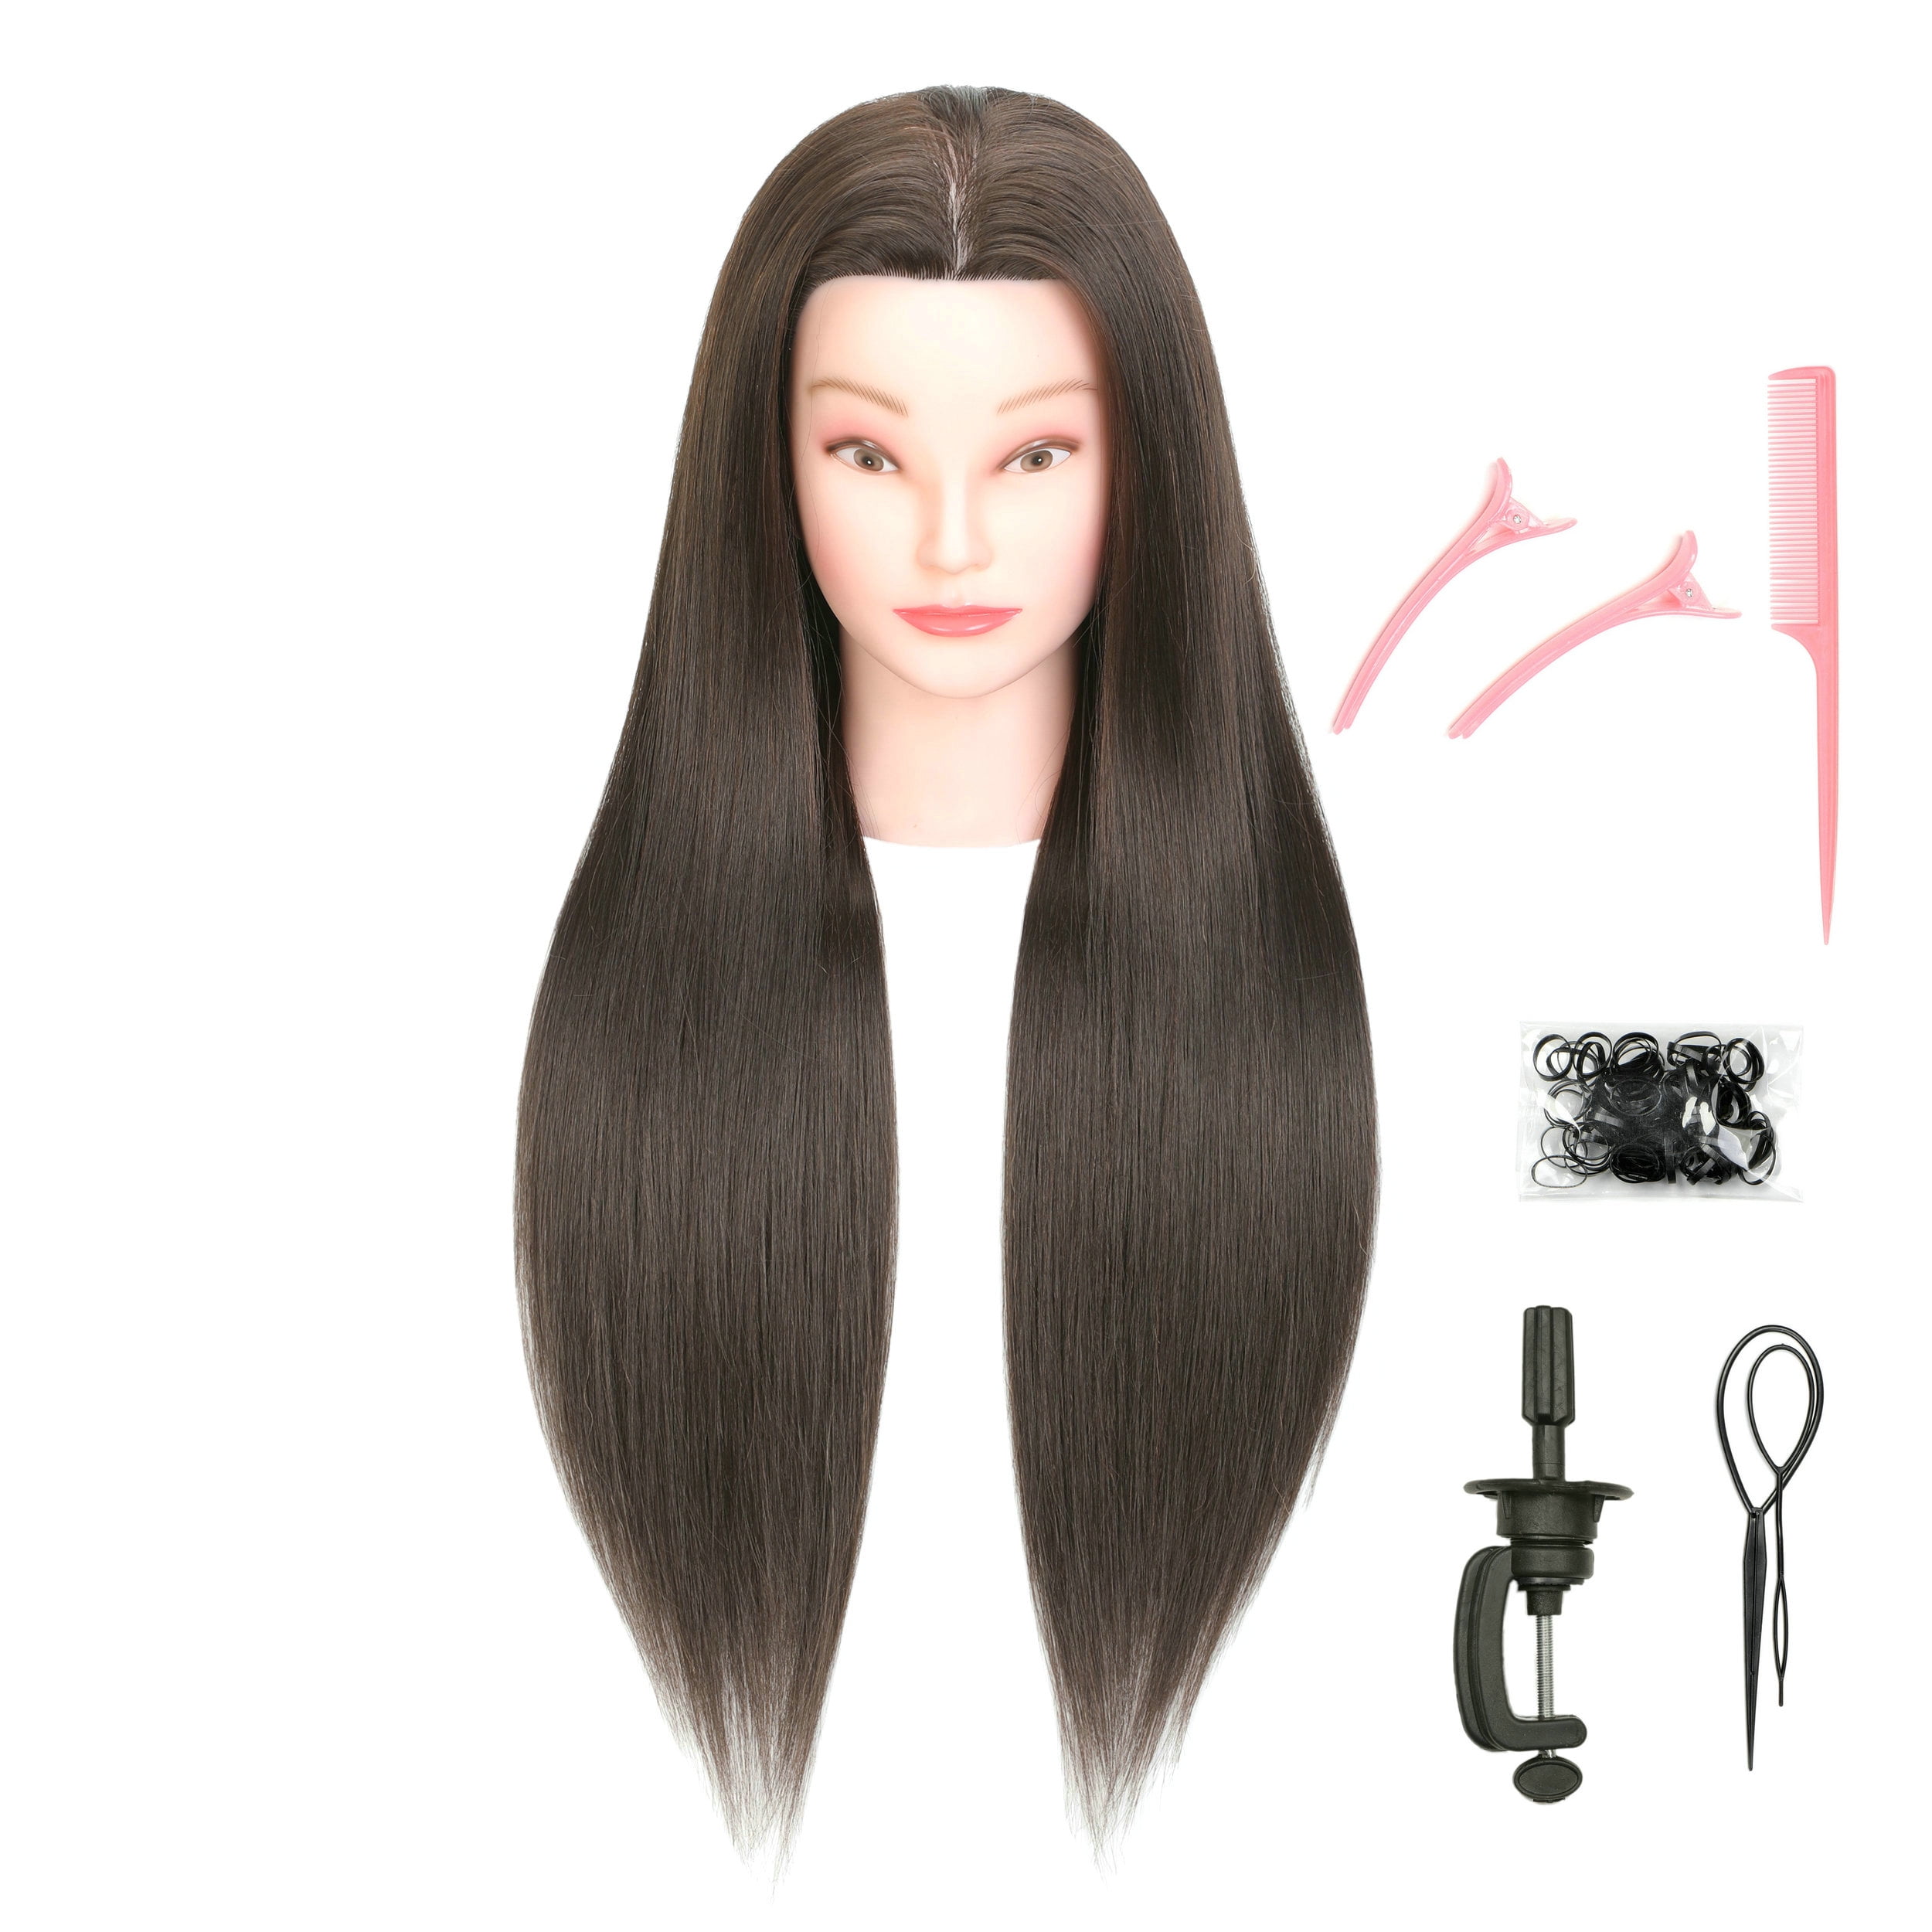 Ryhair 30 inch 20% Real Human Hair Mannequin Head Cosmetology Manican Mannequins Heads with Stand for Display Practice Styling Braiding Training